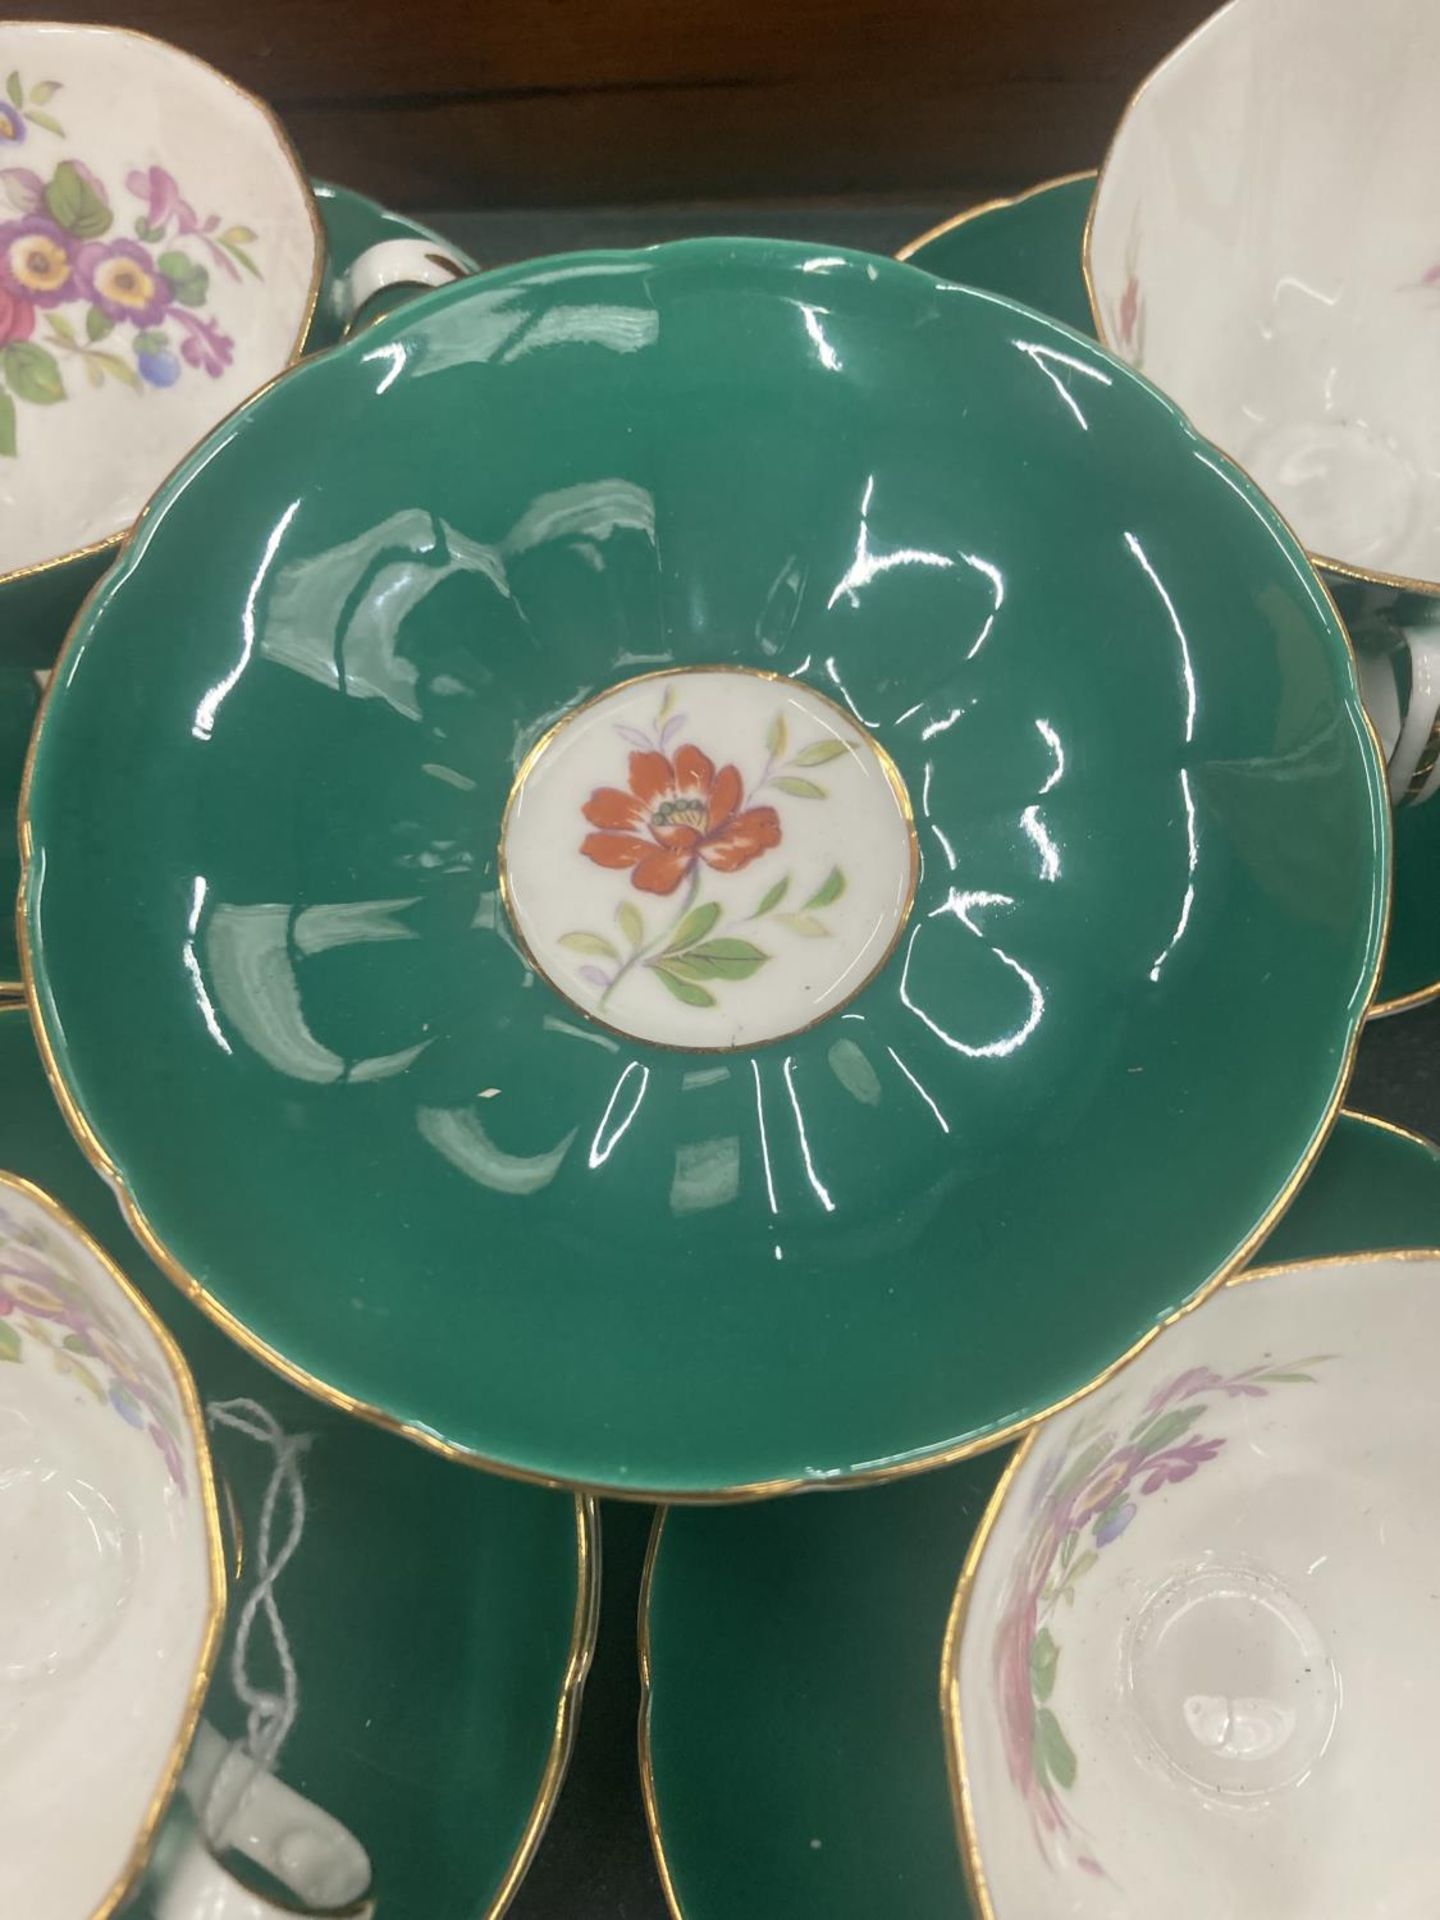 FIVE ADDERLEY CHINA CUPS AND SIX SAUCERS IN A DARK GREEN WITH A FLORAL PATTERN - Image 3 of 4